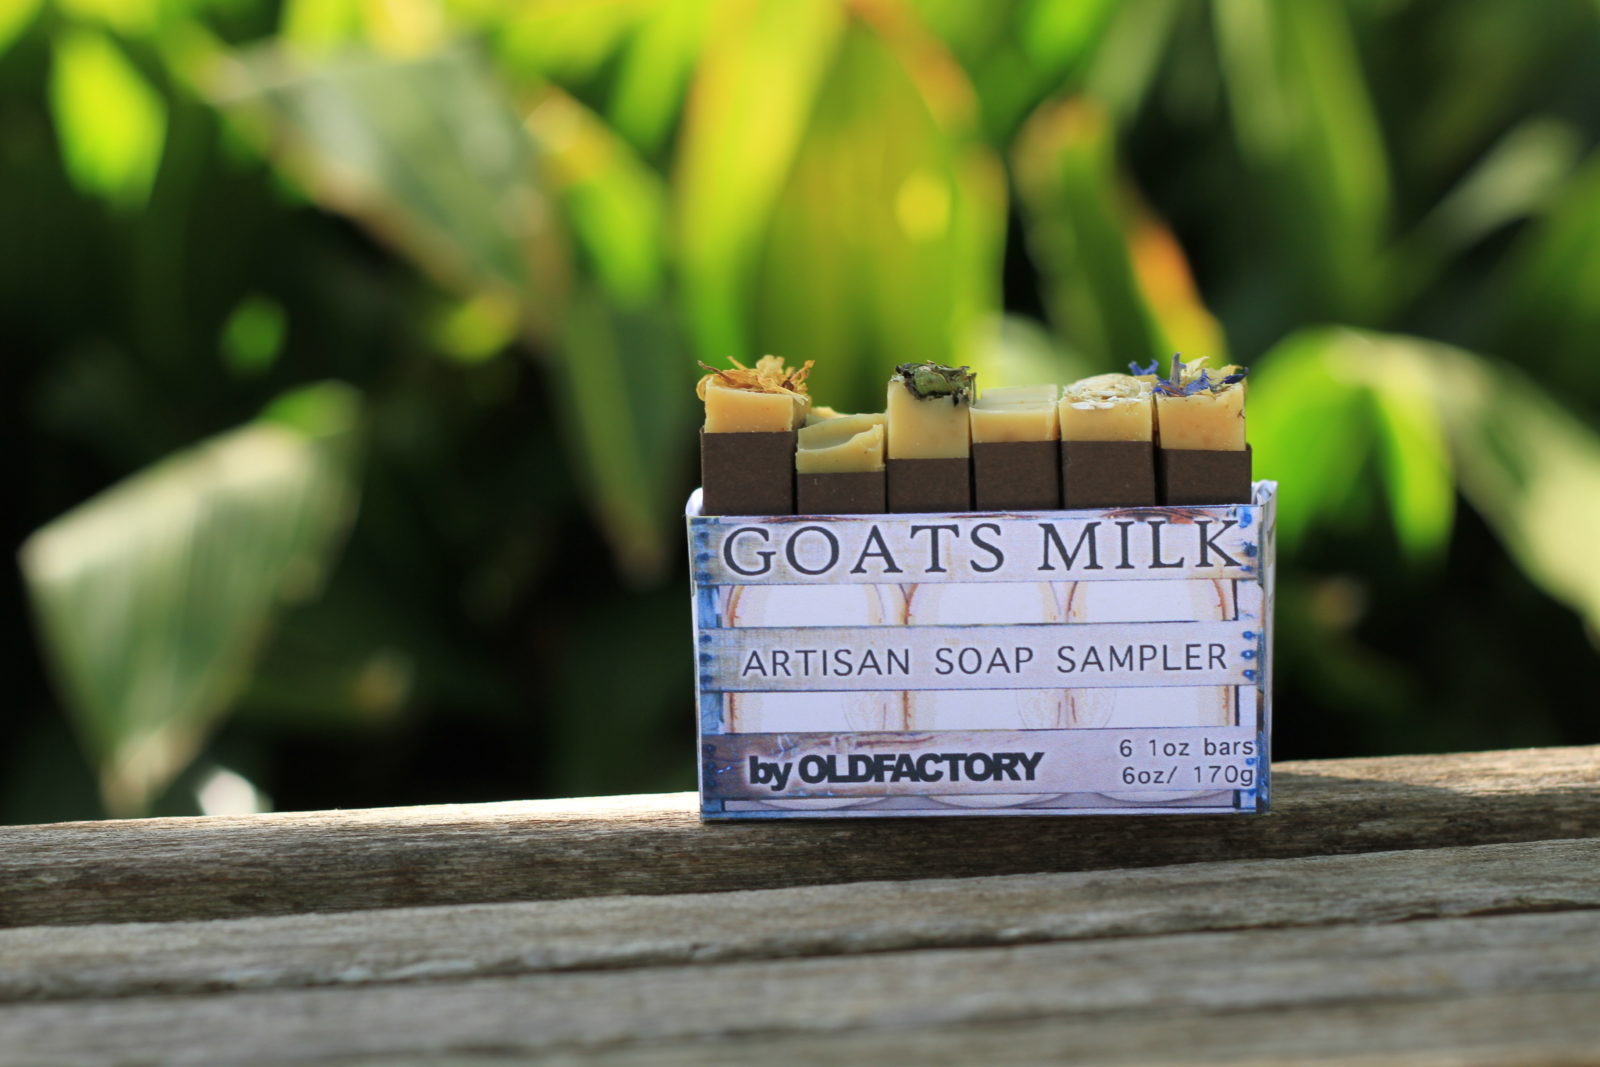 Goats Milk Soap Sampler by Old Factory Soap Company